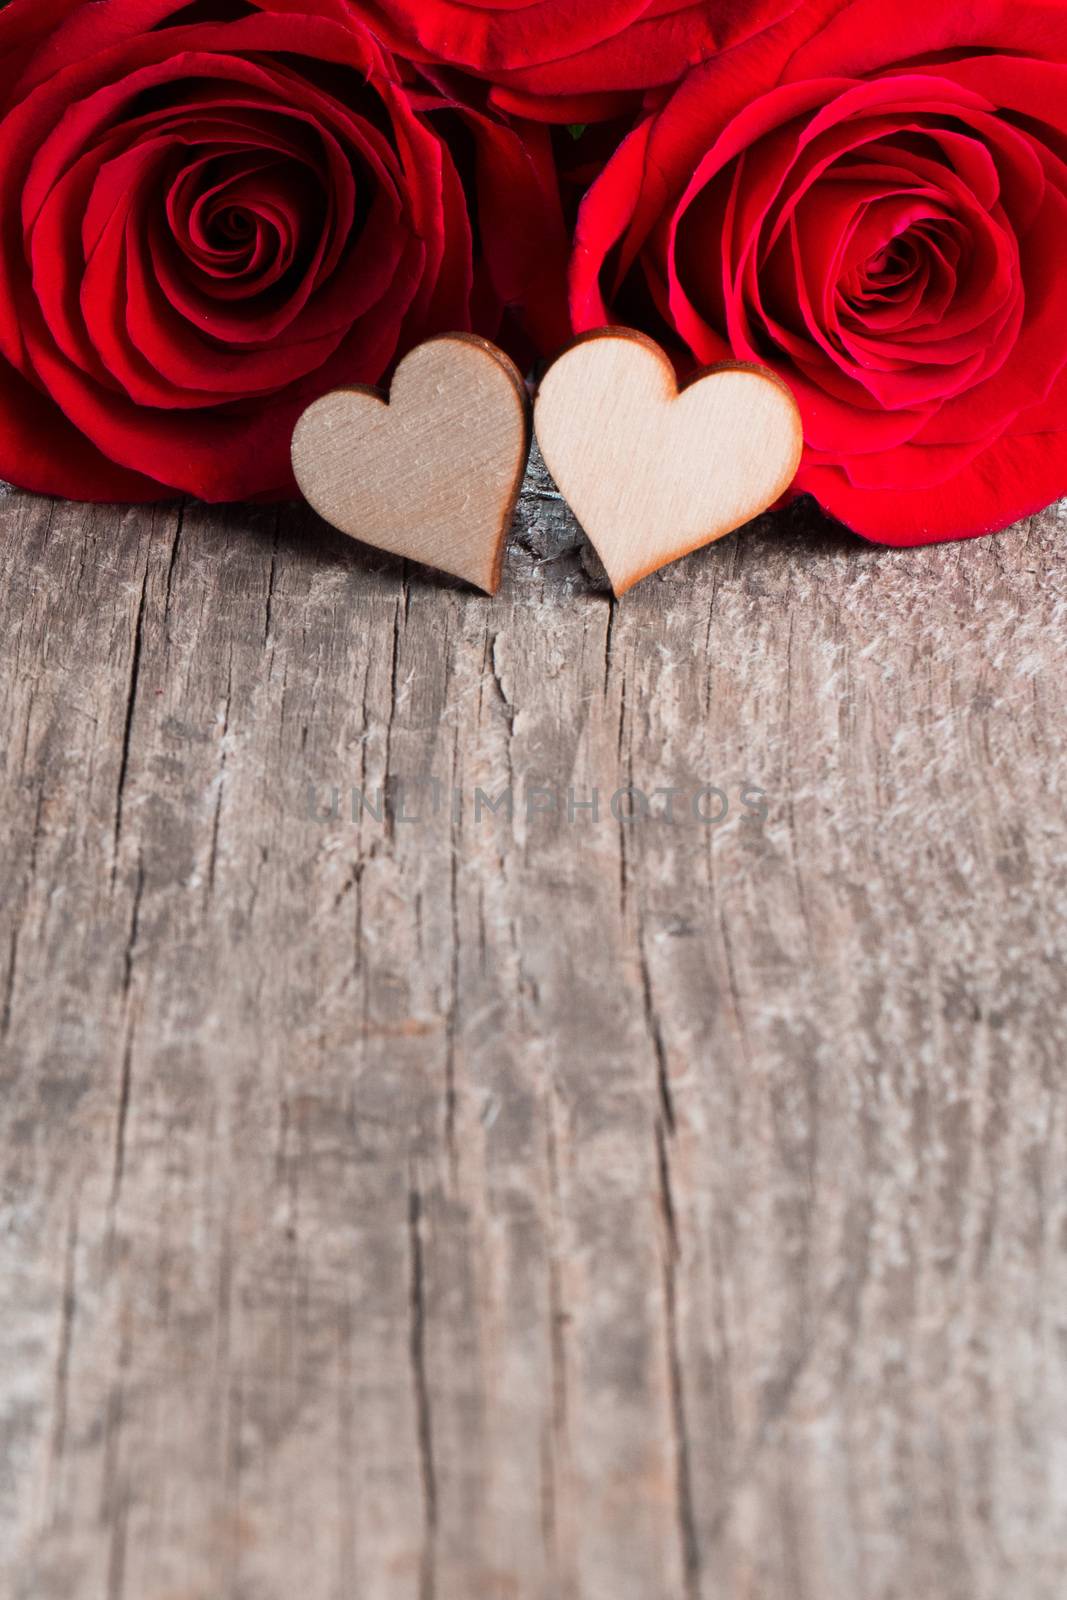 Two roses and wooden hearts on old plank background, Valentines day